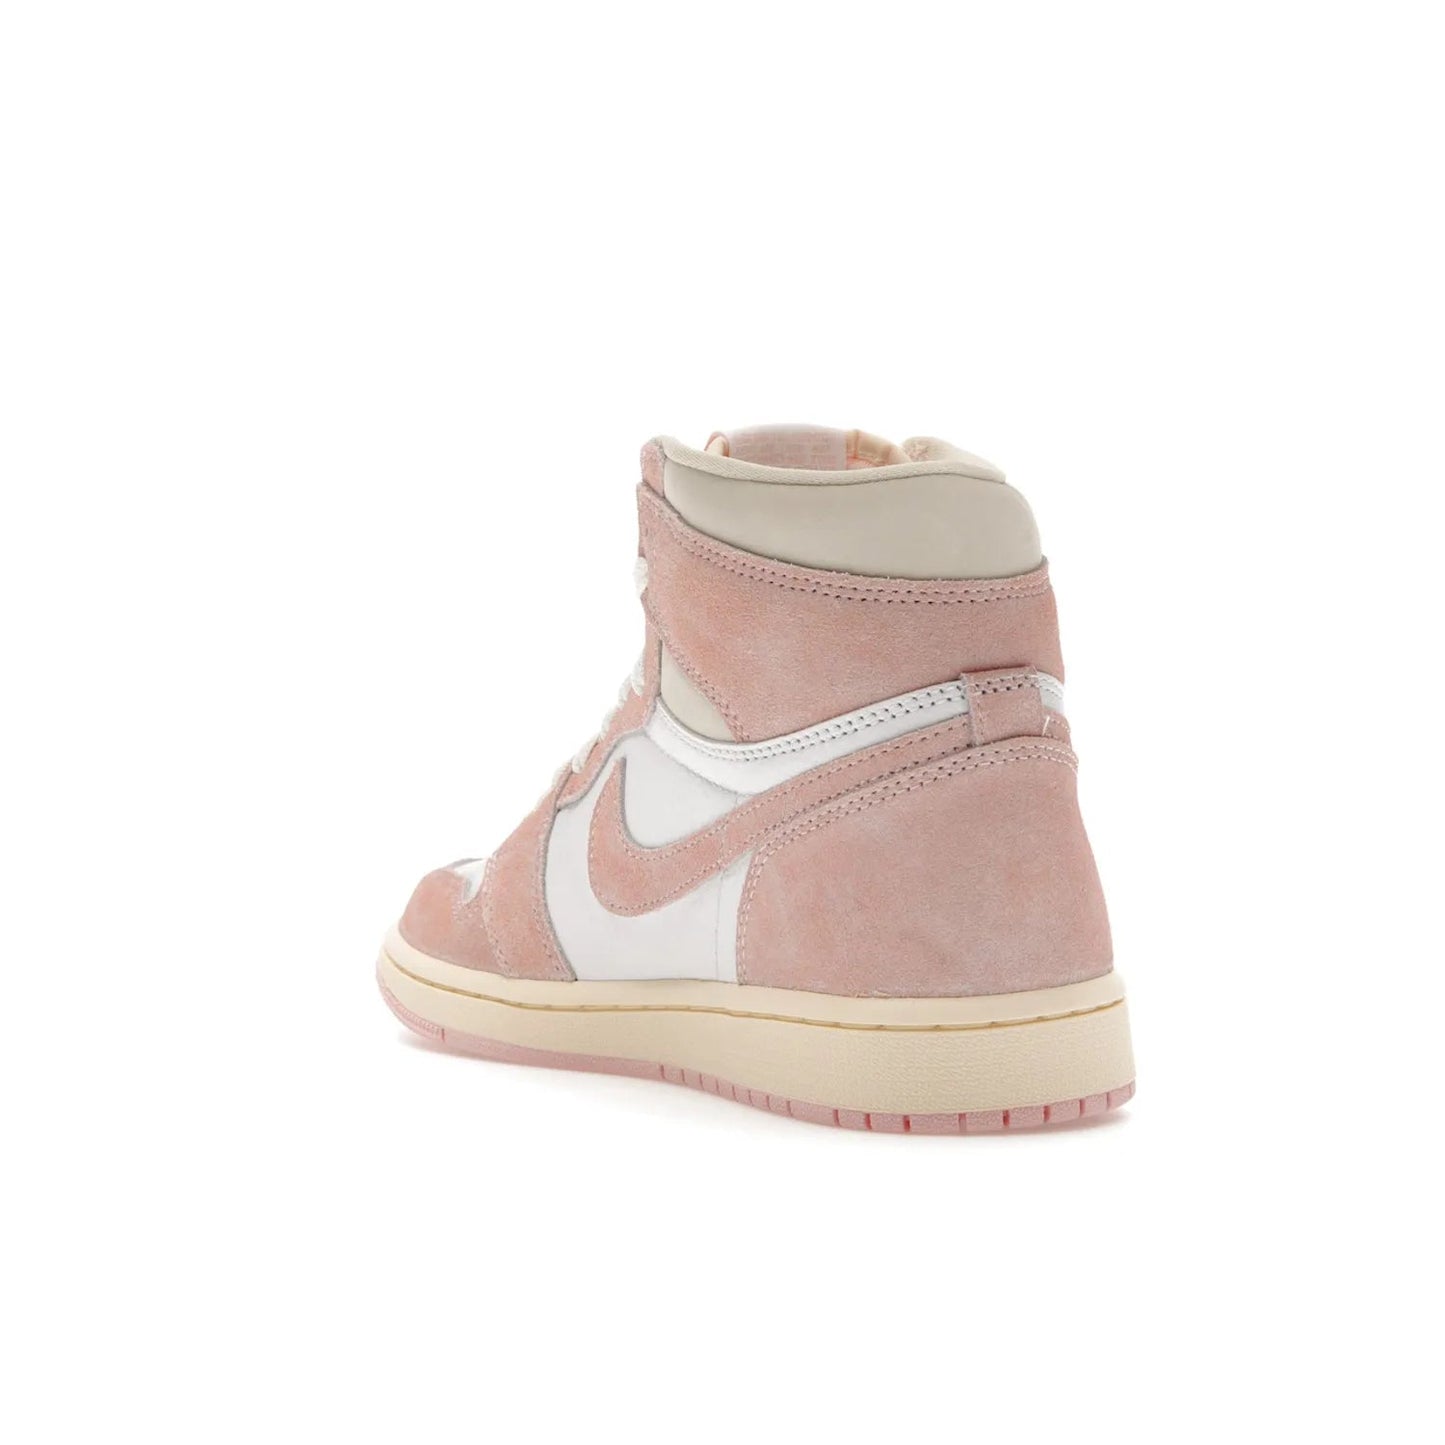 Jordan 1 Retro High OG Washed Pink (Women's) - Image 25 - Only at www.BallersClubKickz.com - Iconic Air Jordan 1 Retro High OG for women with unique pink suede and white leather uppers. Get the timeless look on April 22, 2023.